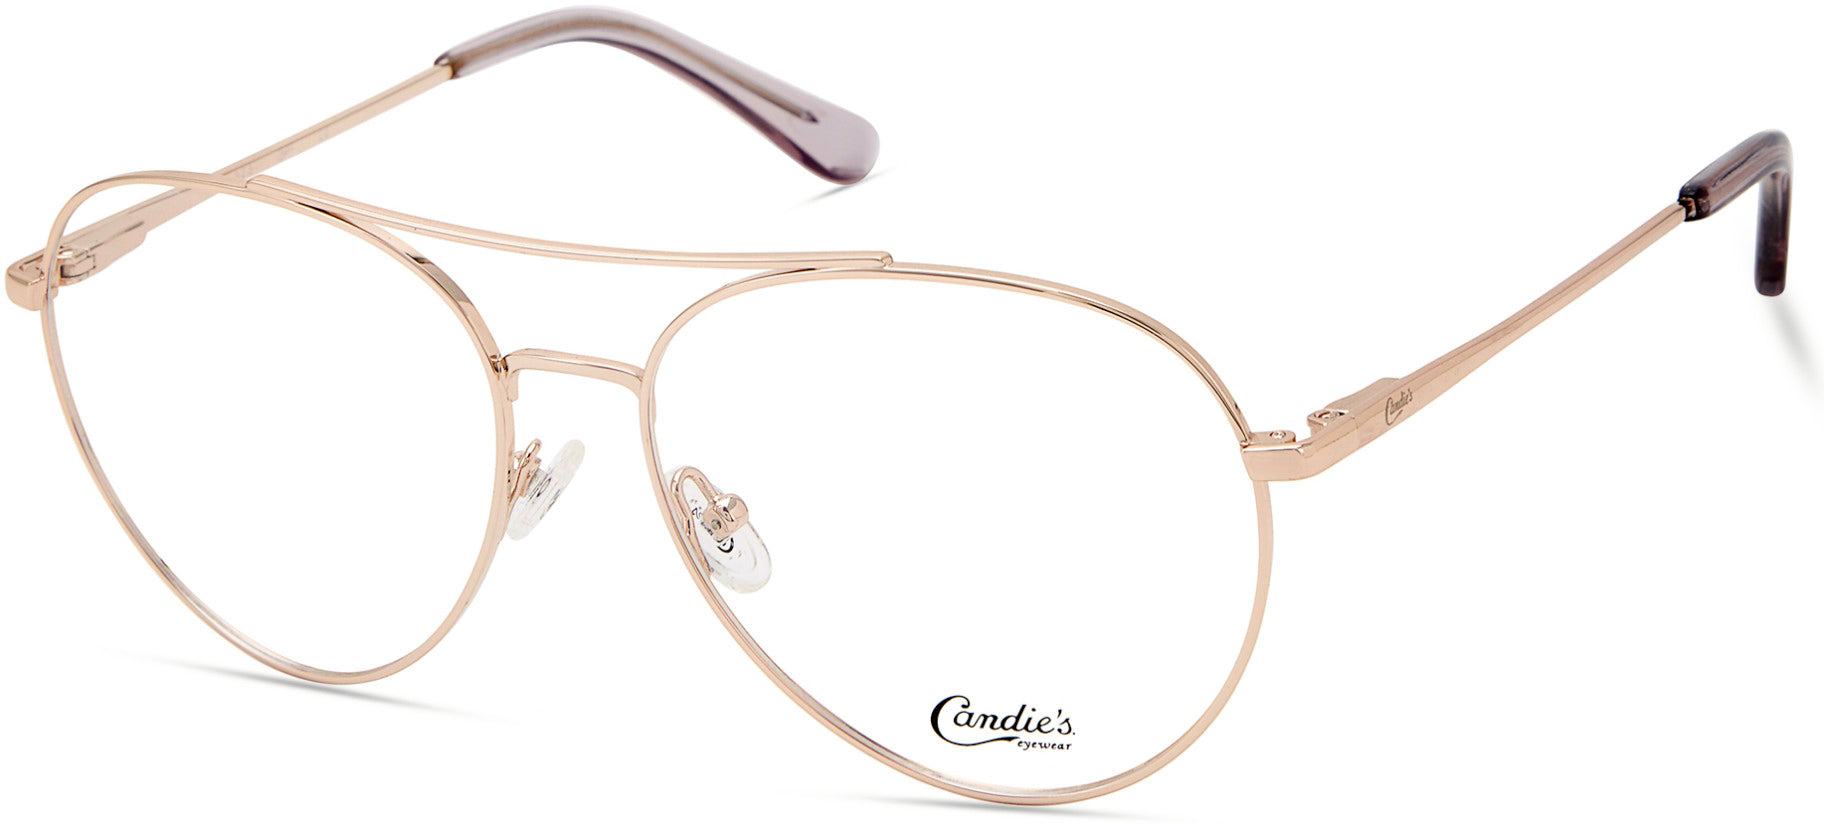 Candies CA0173 Geometric Eyeglasses 028-028 - Shiny Rose Gold Metal With Plum Temple Tips